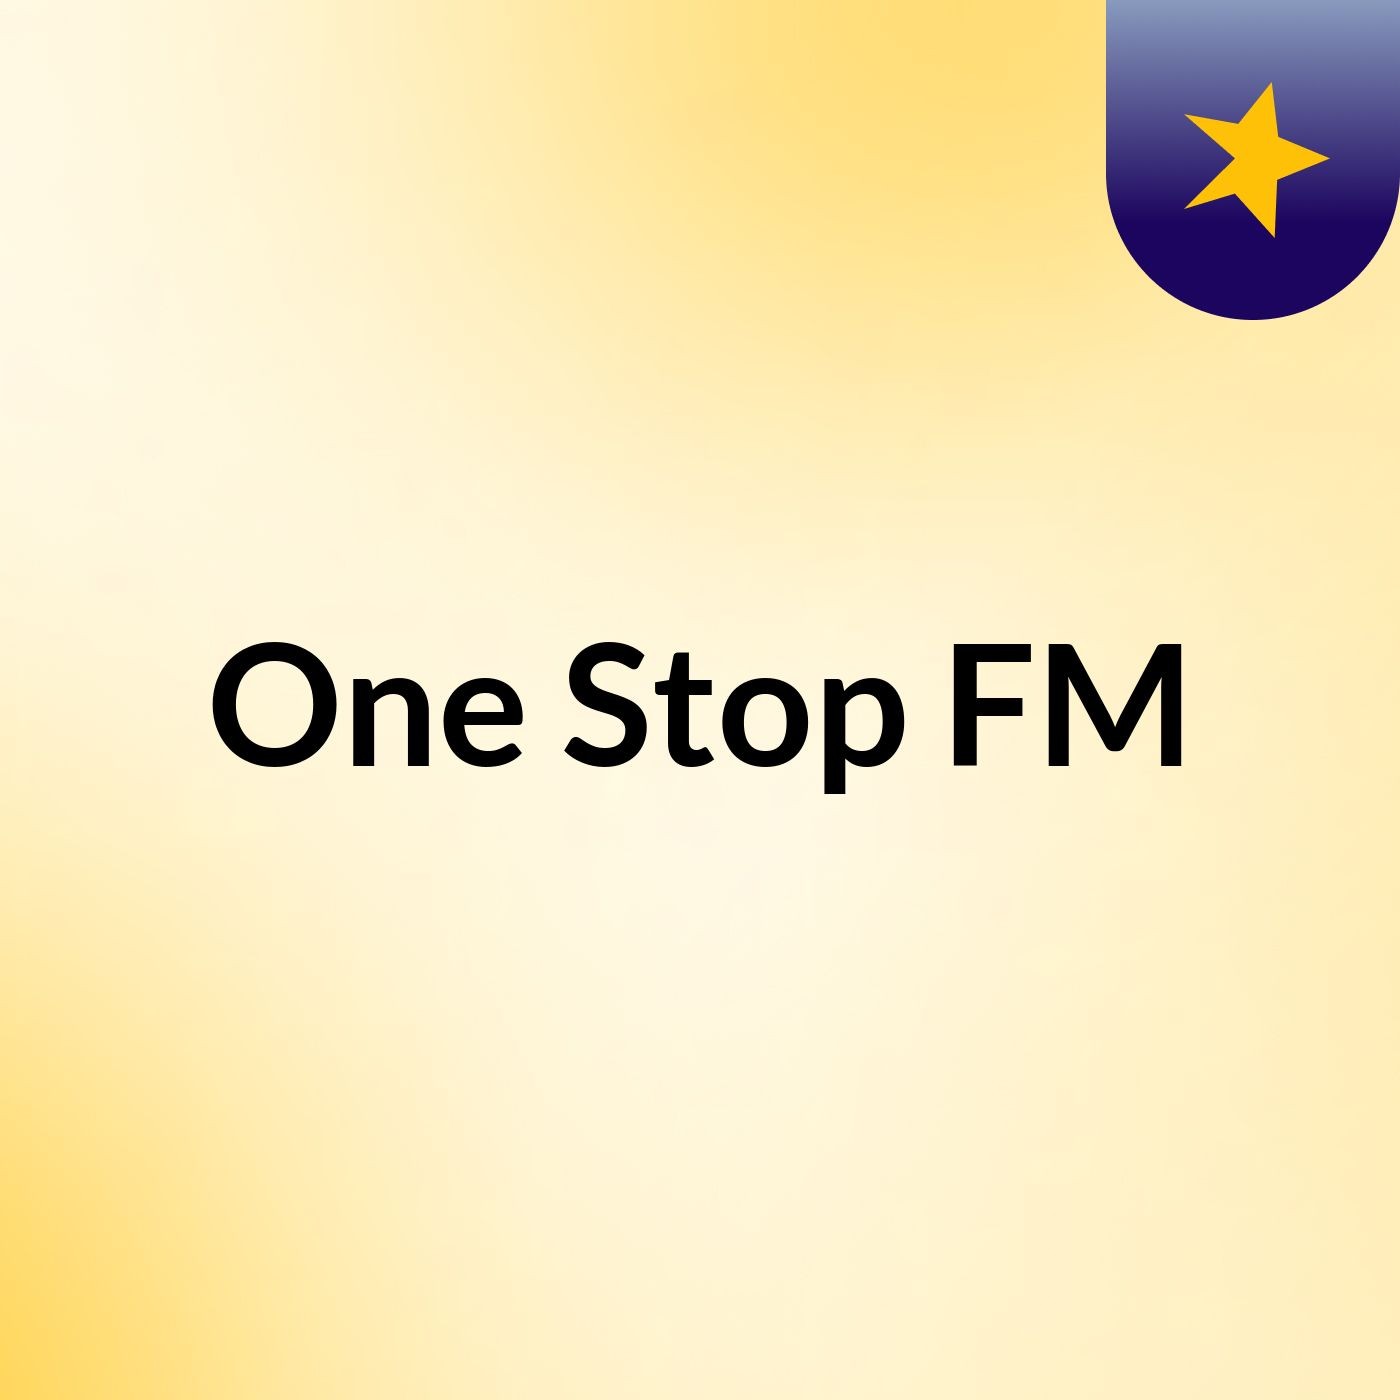 One Stop FM 02.04.14